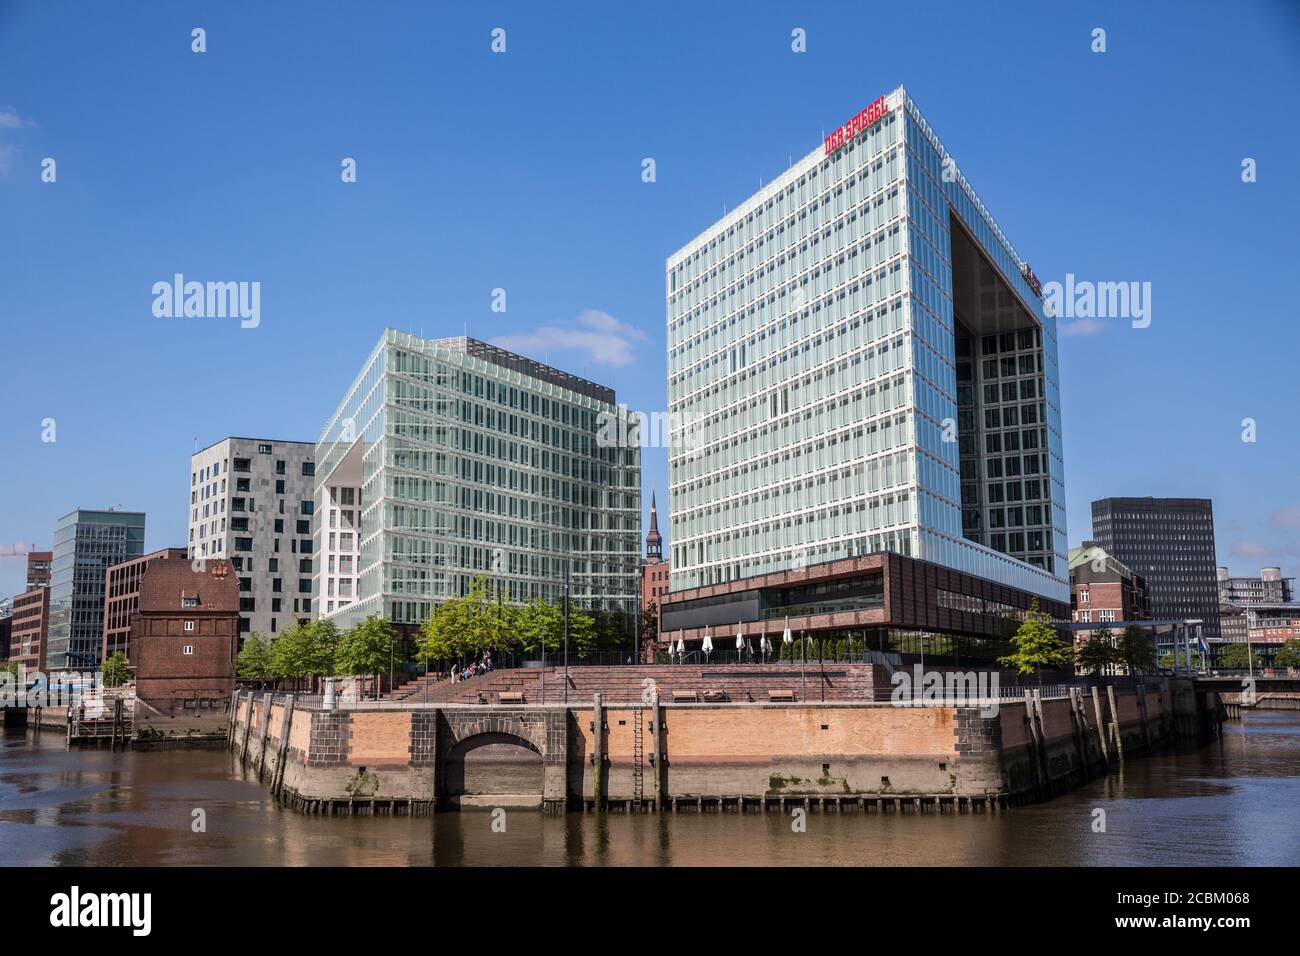 View of apartment and office block waterfronts, HafenCity, Hamburg, Germany Stock Photo